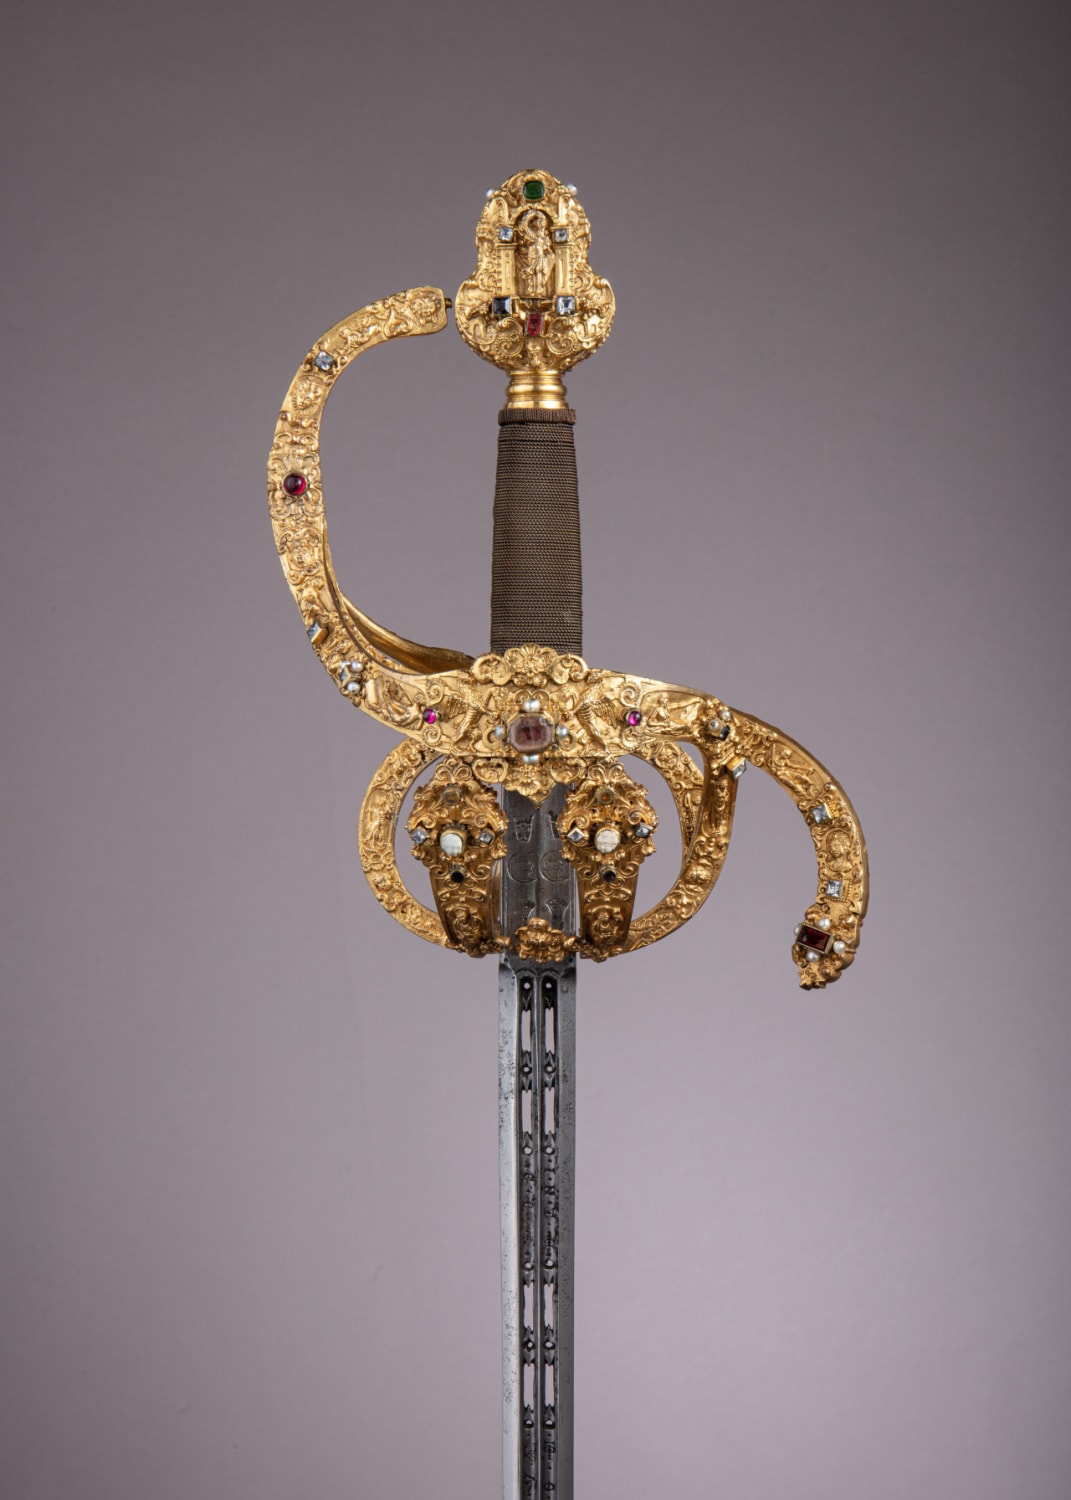 The beautiful jeweled and latticed Rapier crafted by Israel Schuech in 1606, for Christian II Elector of Saxony, Metropolitan Museum of Art.